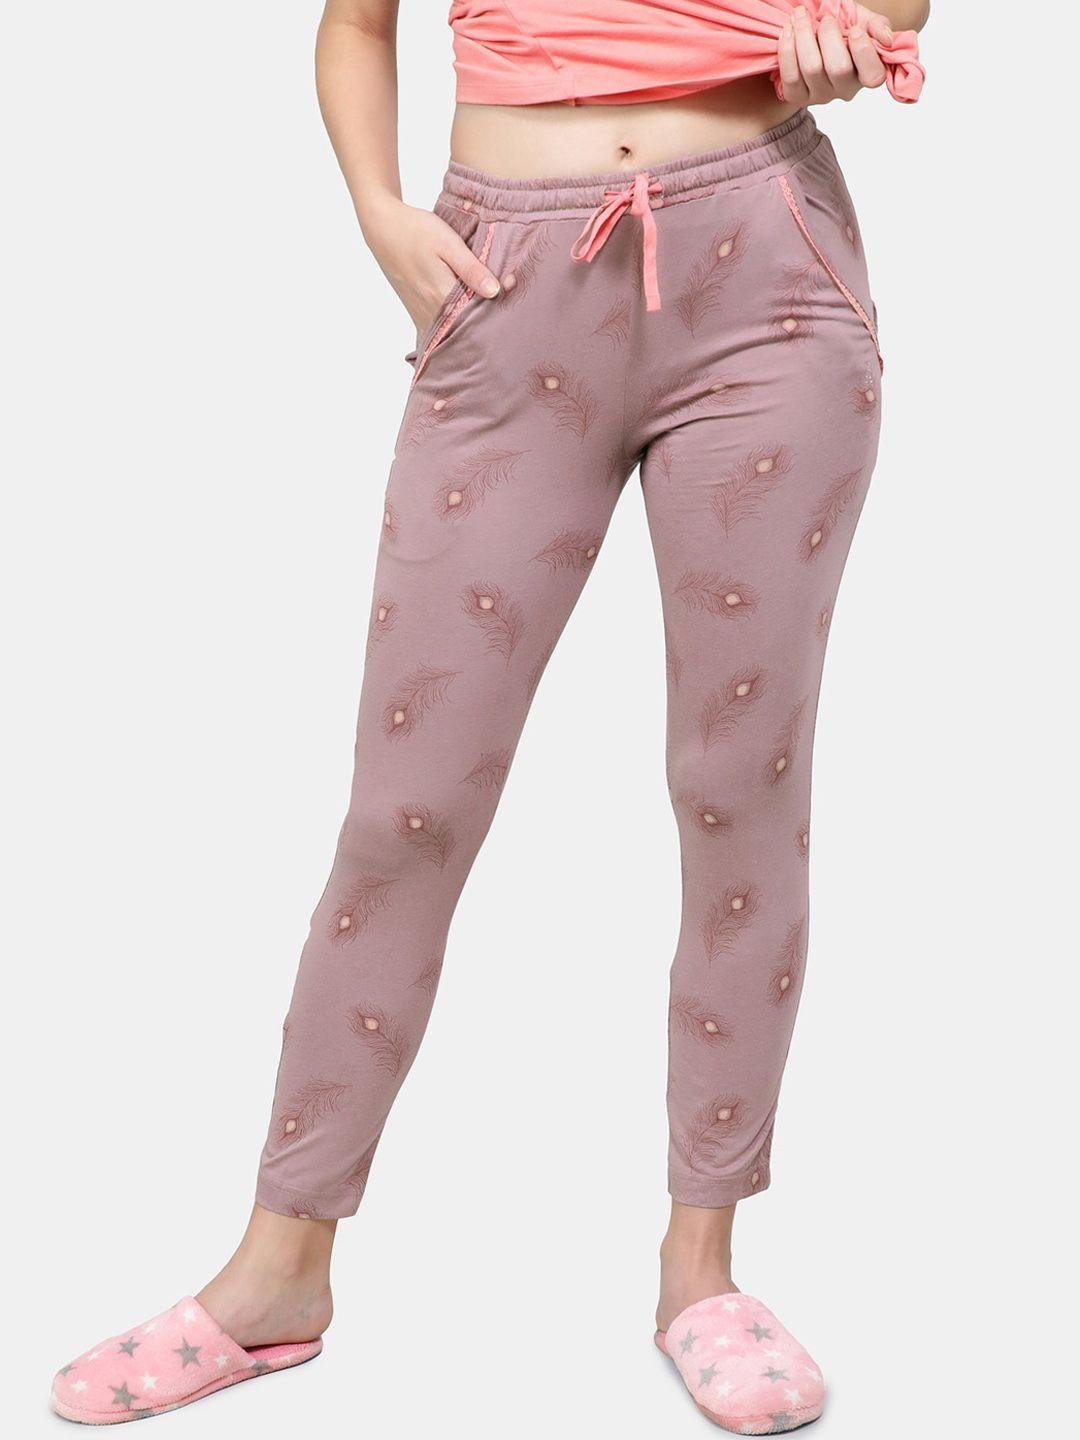 jockey relaxed fit printed lounge pants